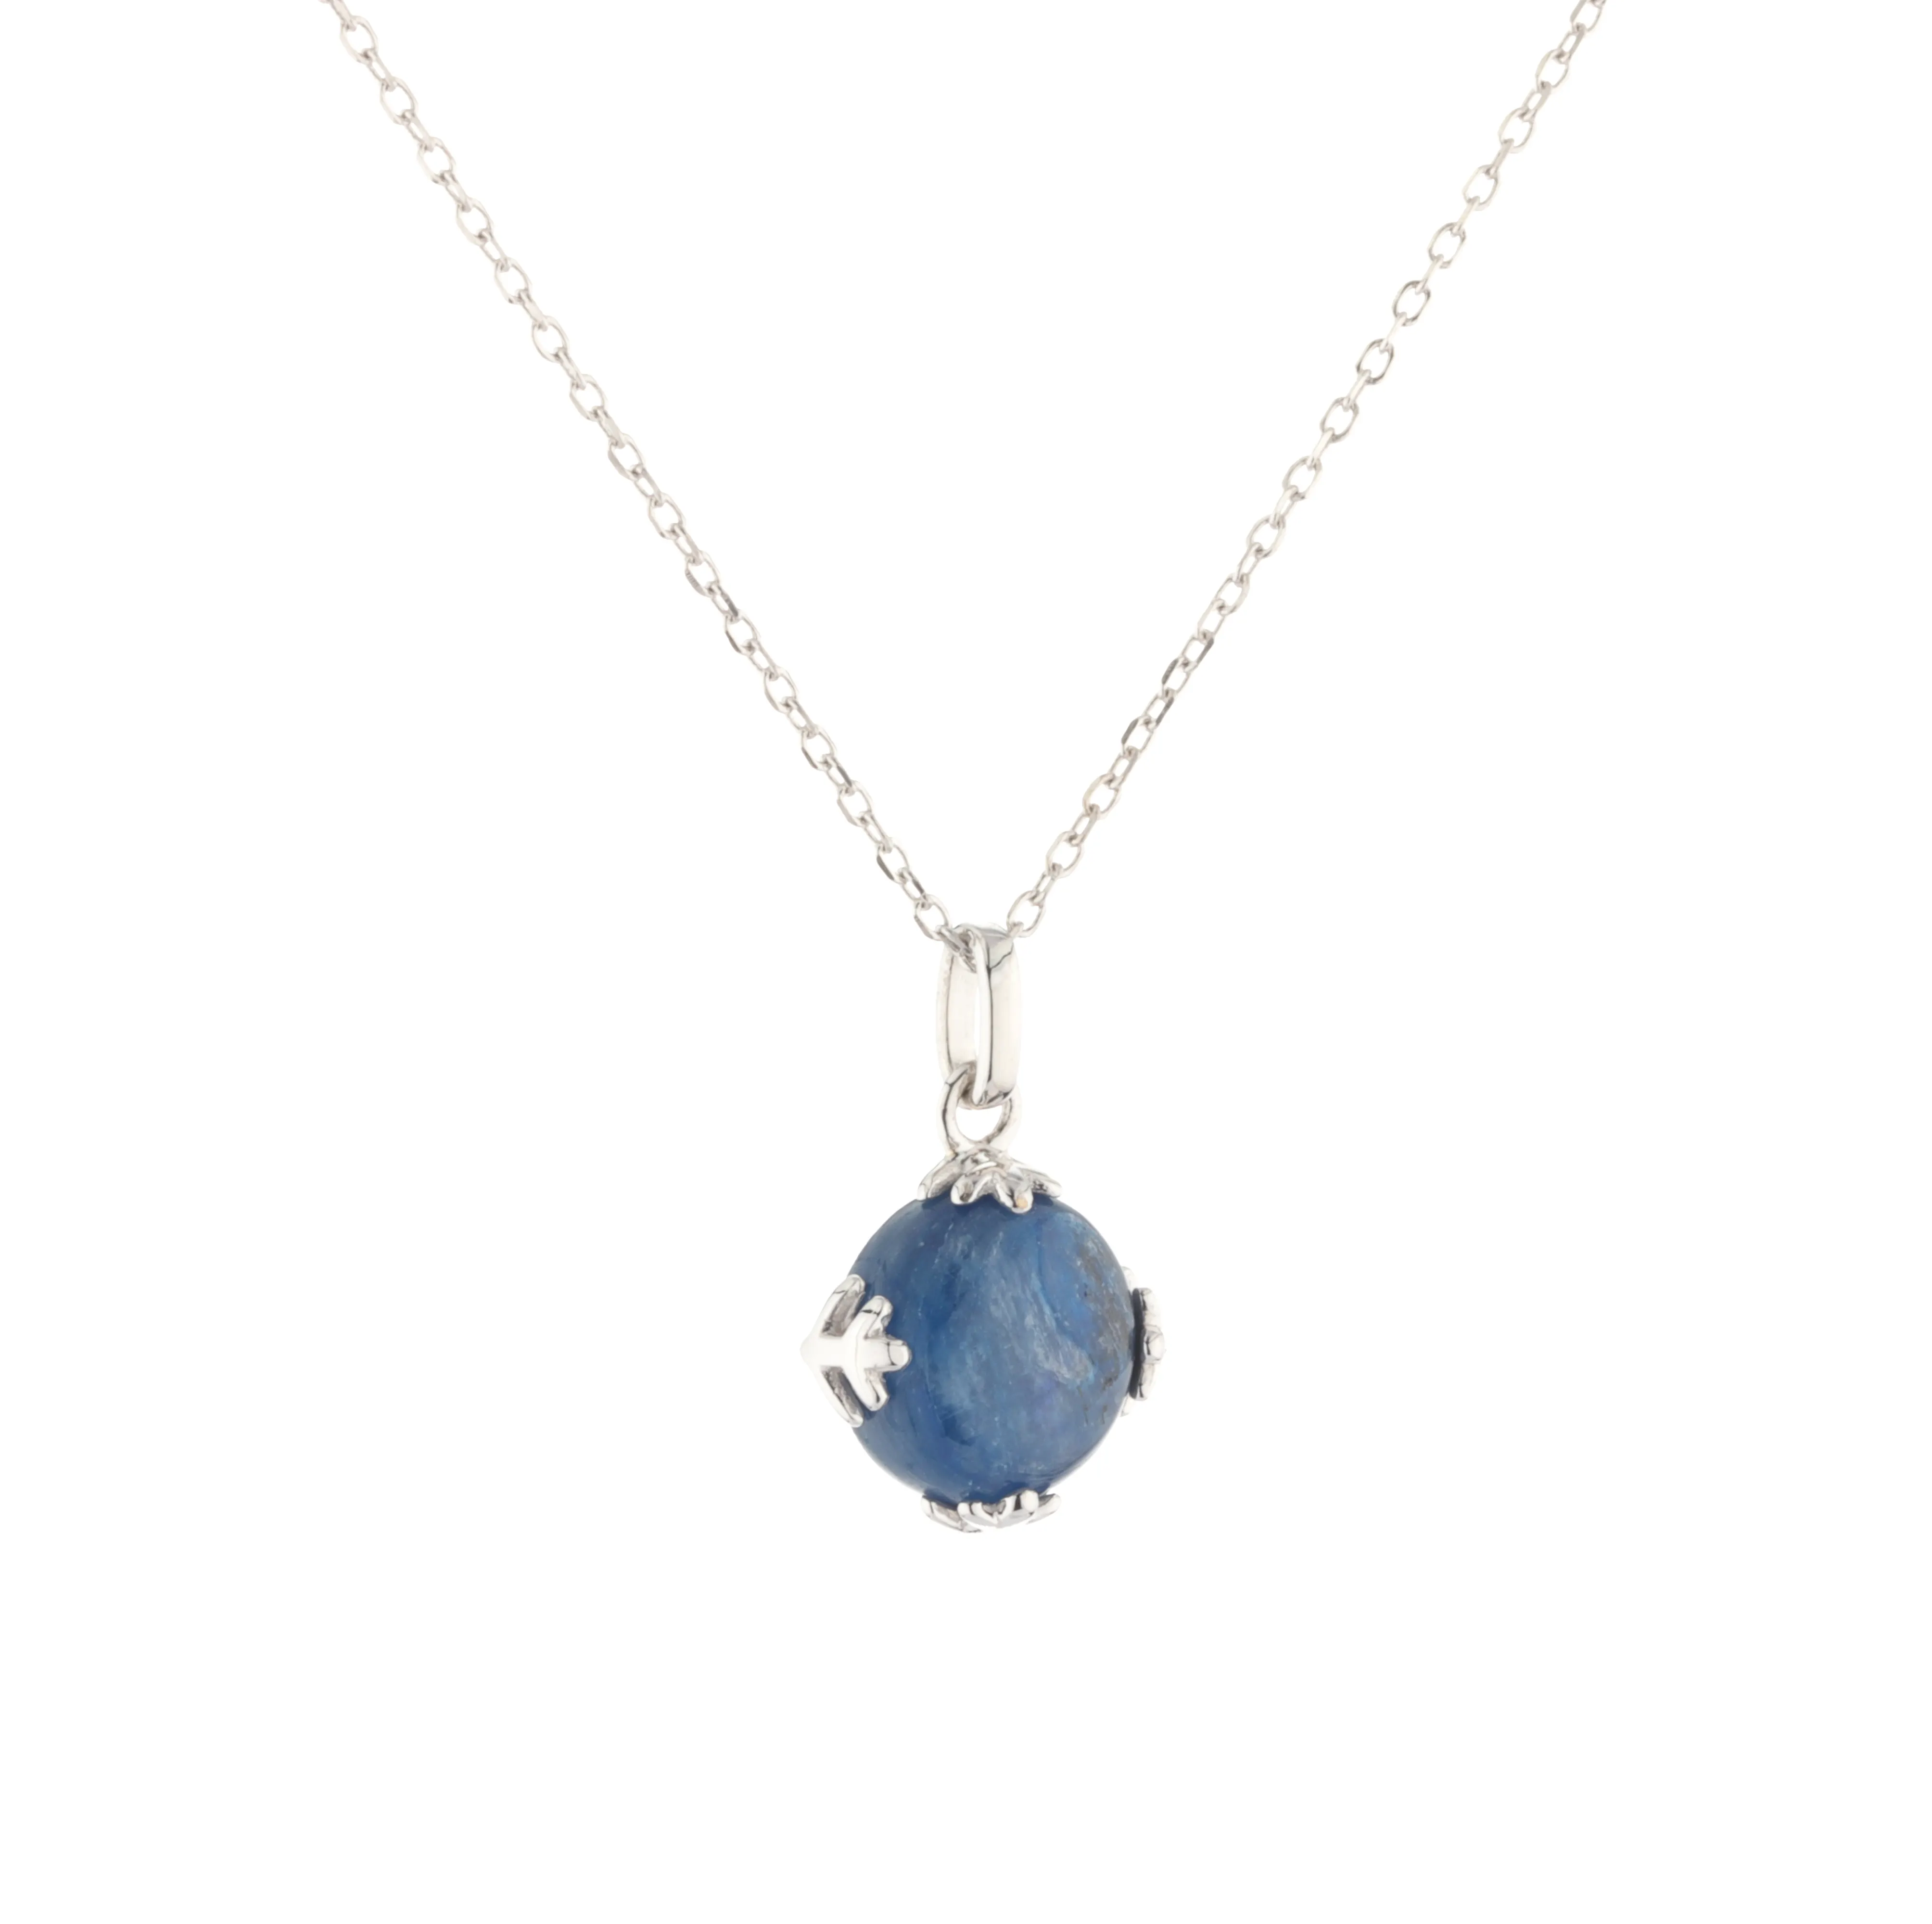 925 Sterling Silver snowflake gemstone necklace Kyanite pendant gemstone pendant necklace for women